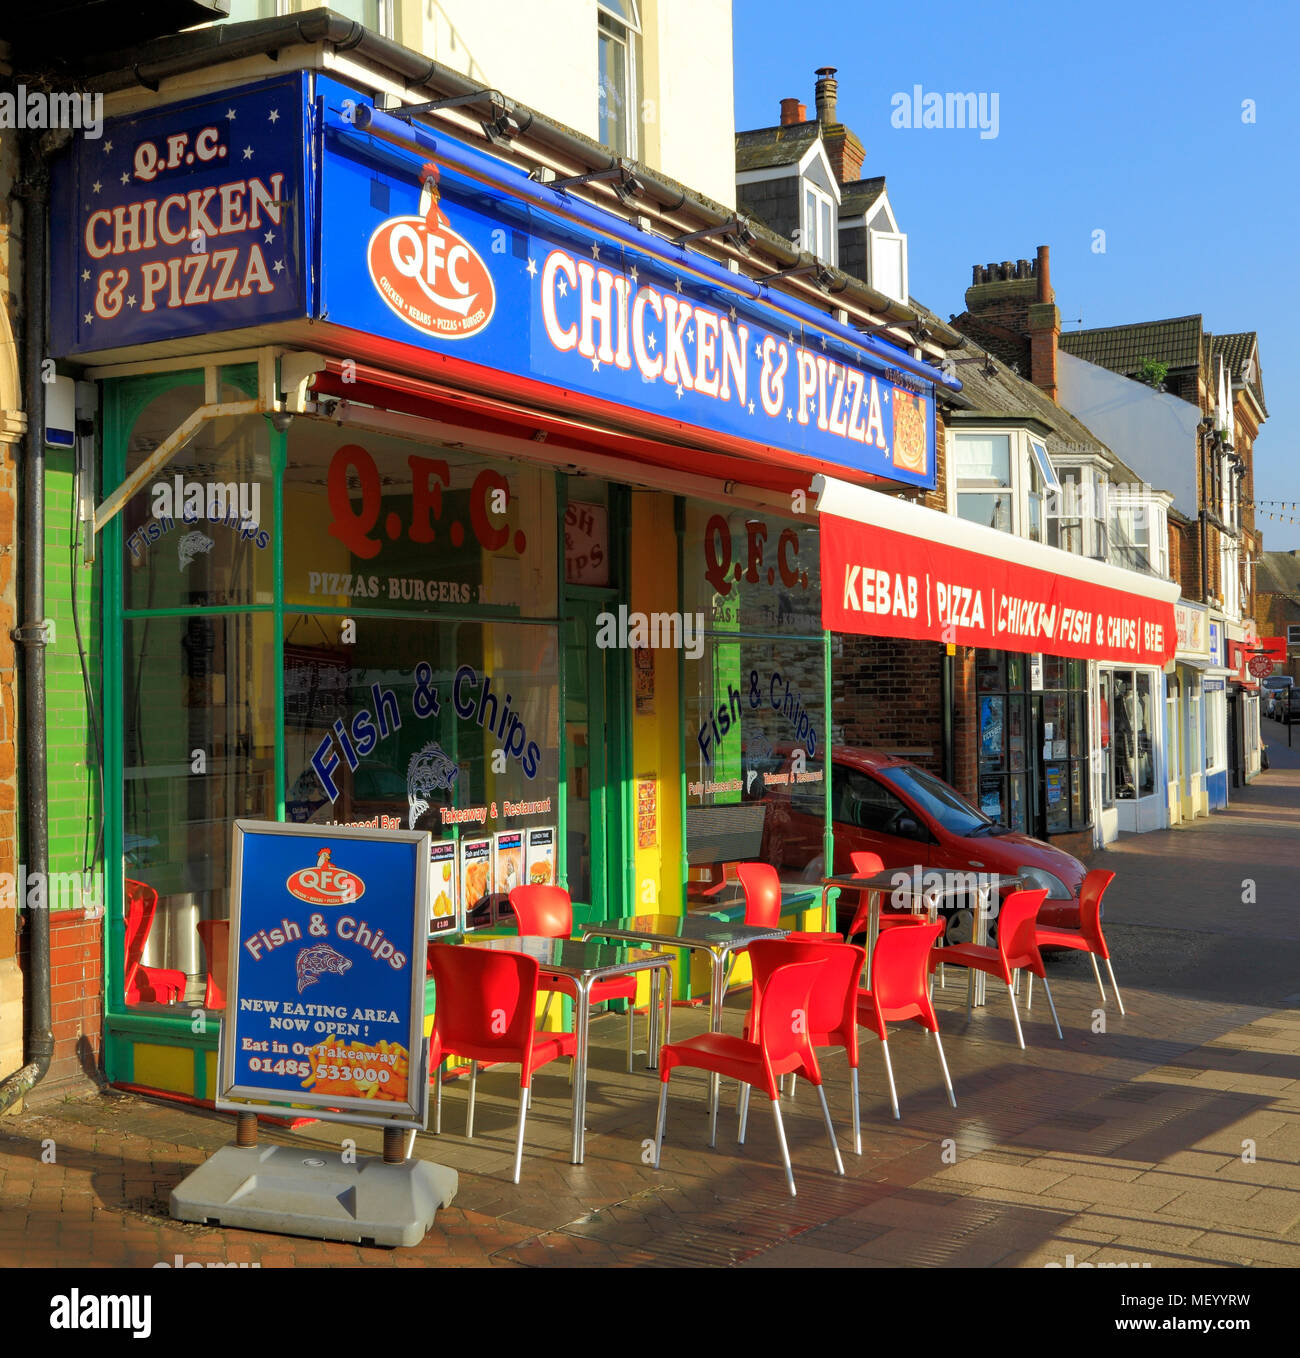 QFC, Chicken & Pizza , fast food outlet, shop, Hunstanton, Norfolk, England, UK, take away, meal, meals, chicken, Pizzas Stock Photo